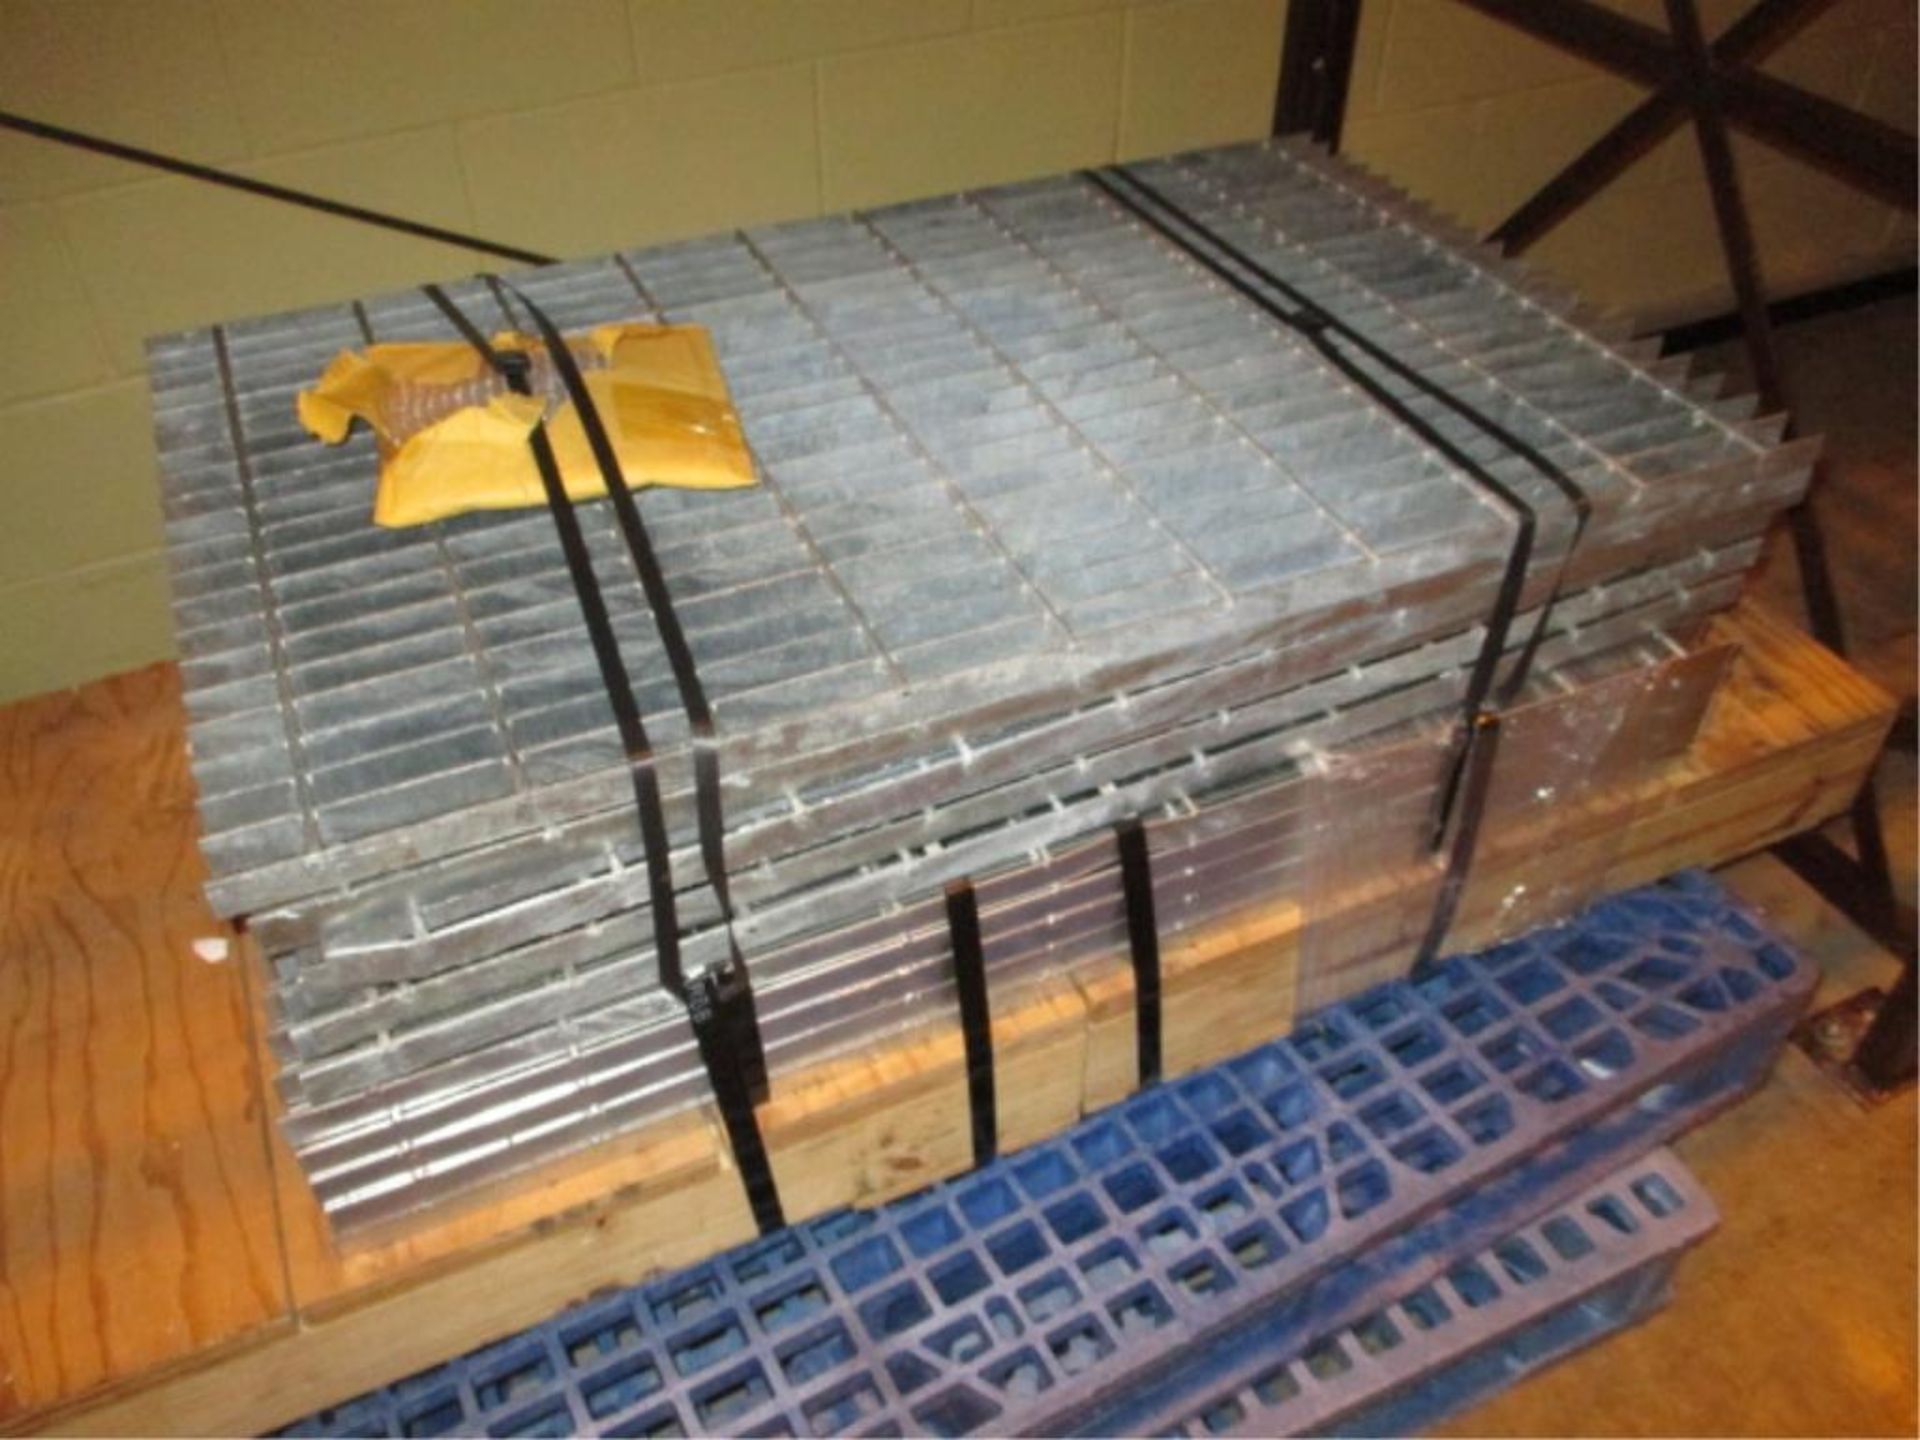 Baffles / Grates; Lot: (2 skids) Assorted Baffle Plates and Grates. HIT# 2222877. Loc: B25-Row02 - Image 3 of 3